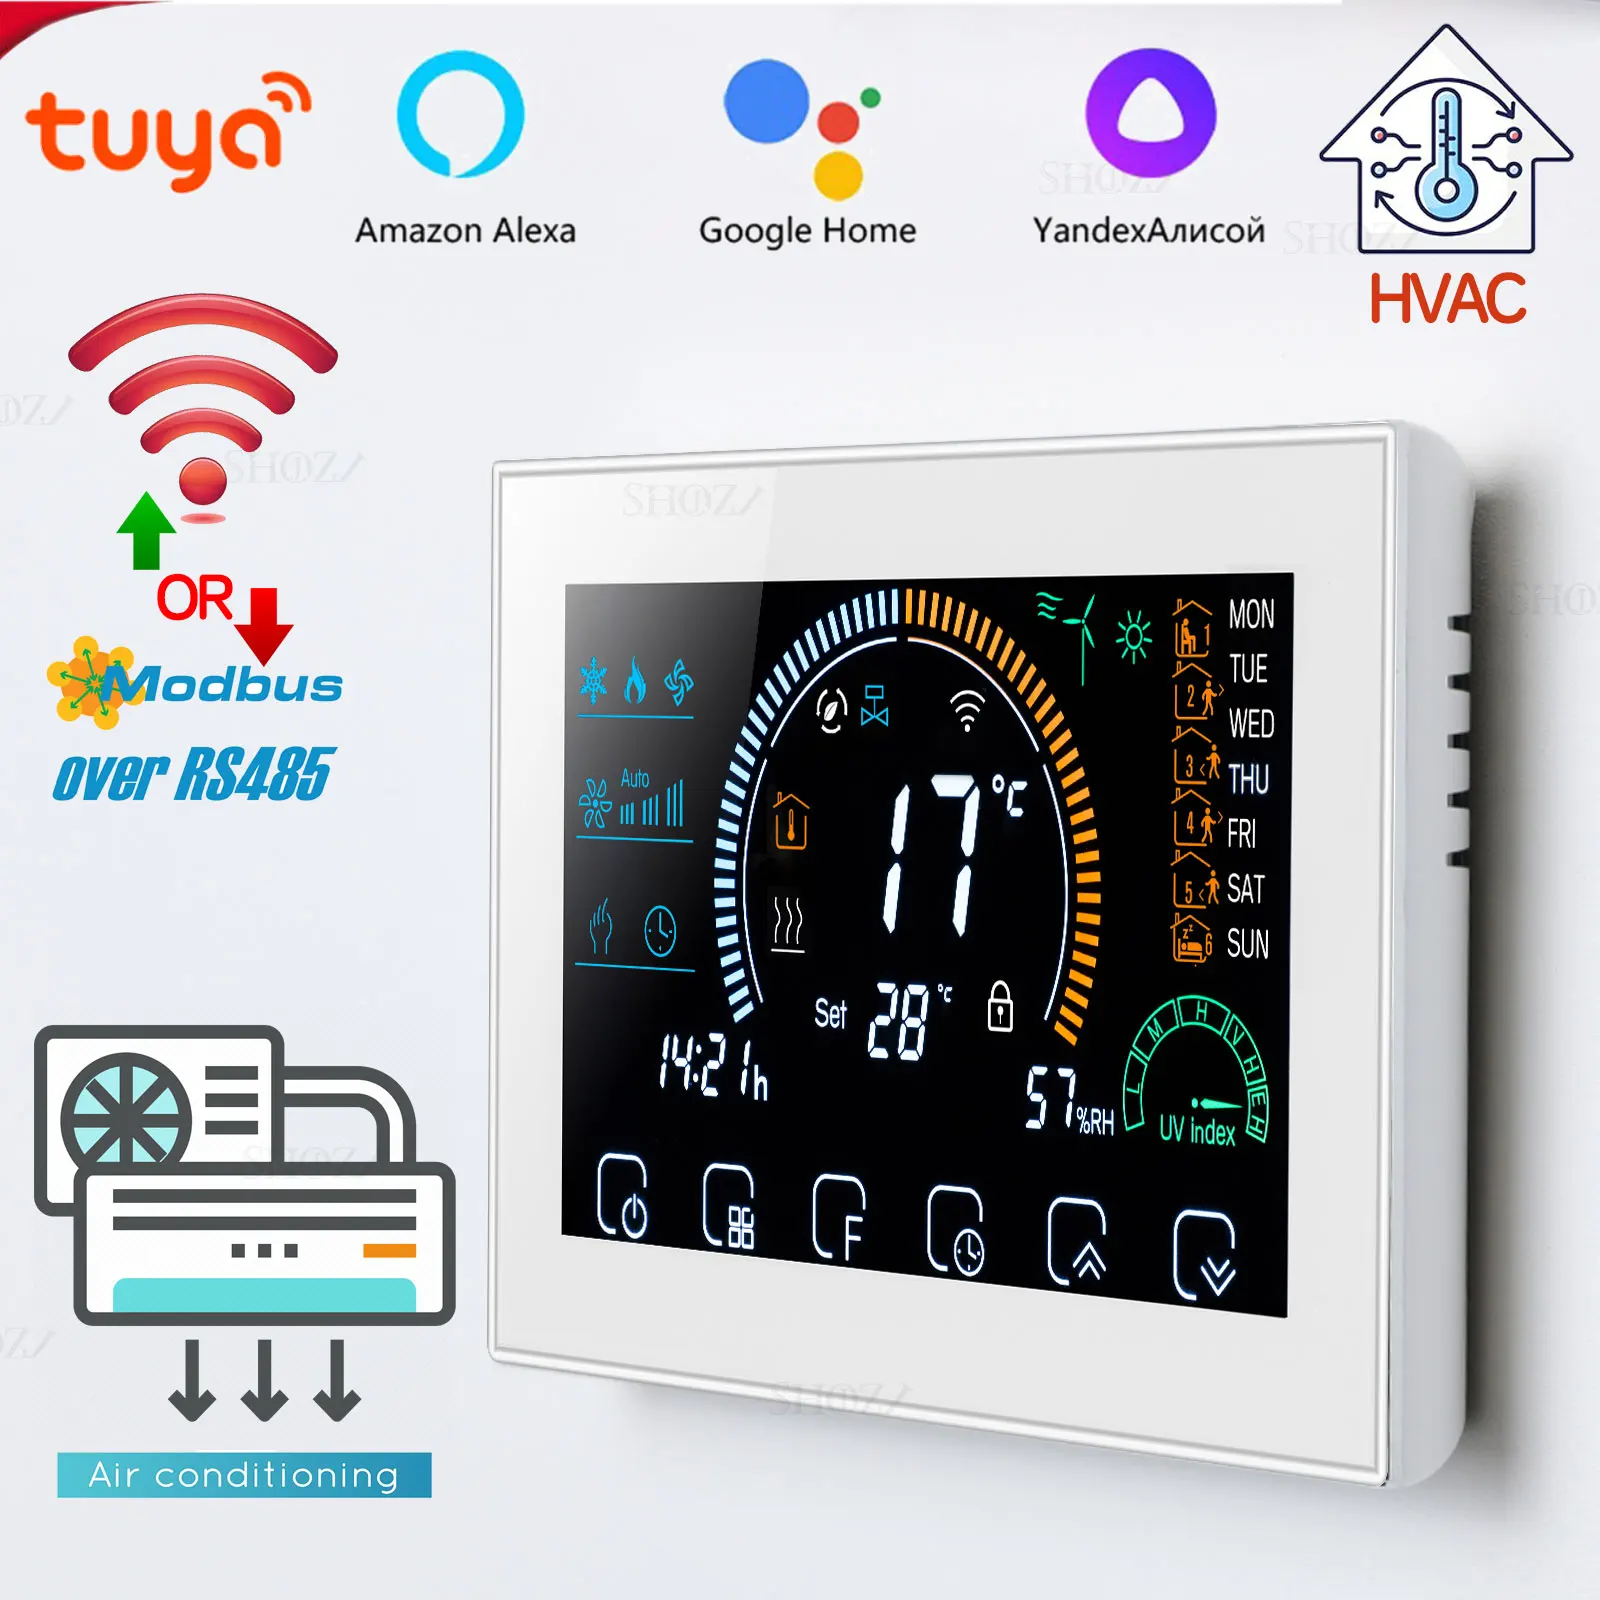 

TUYA WIFI/RS485 Modbus RTU Programmable Thermostat For Control Valve Heat/Cool Air-Conditioning HAVC System With Alexa Google